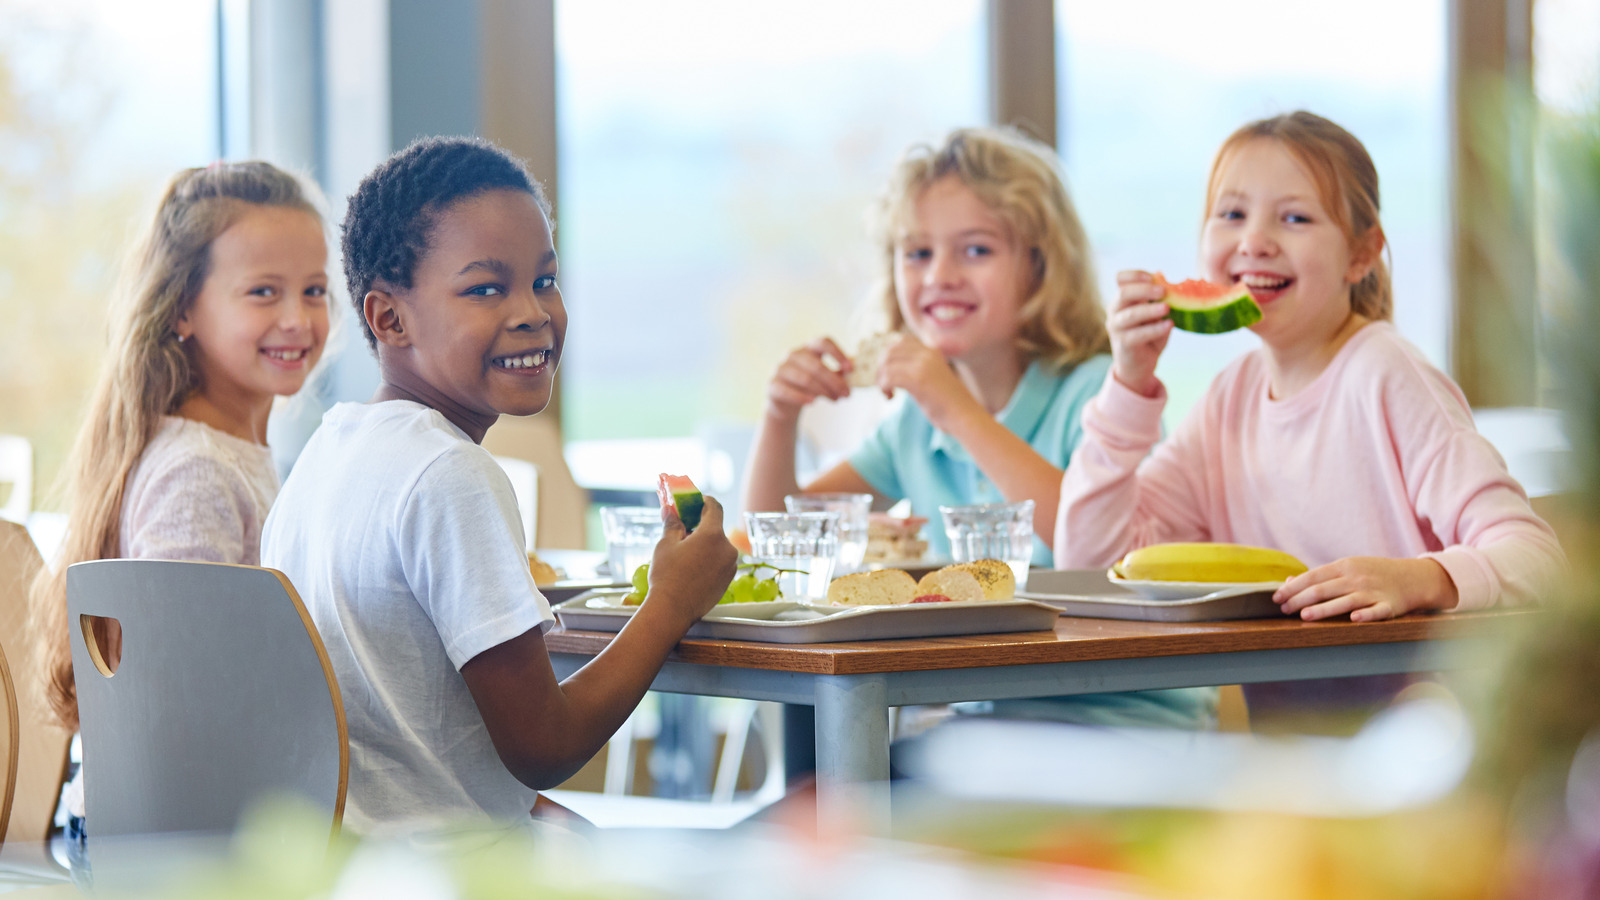 New Bill Aims To Give The US School Lunch System A Major Boost